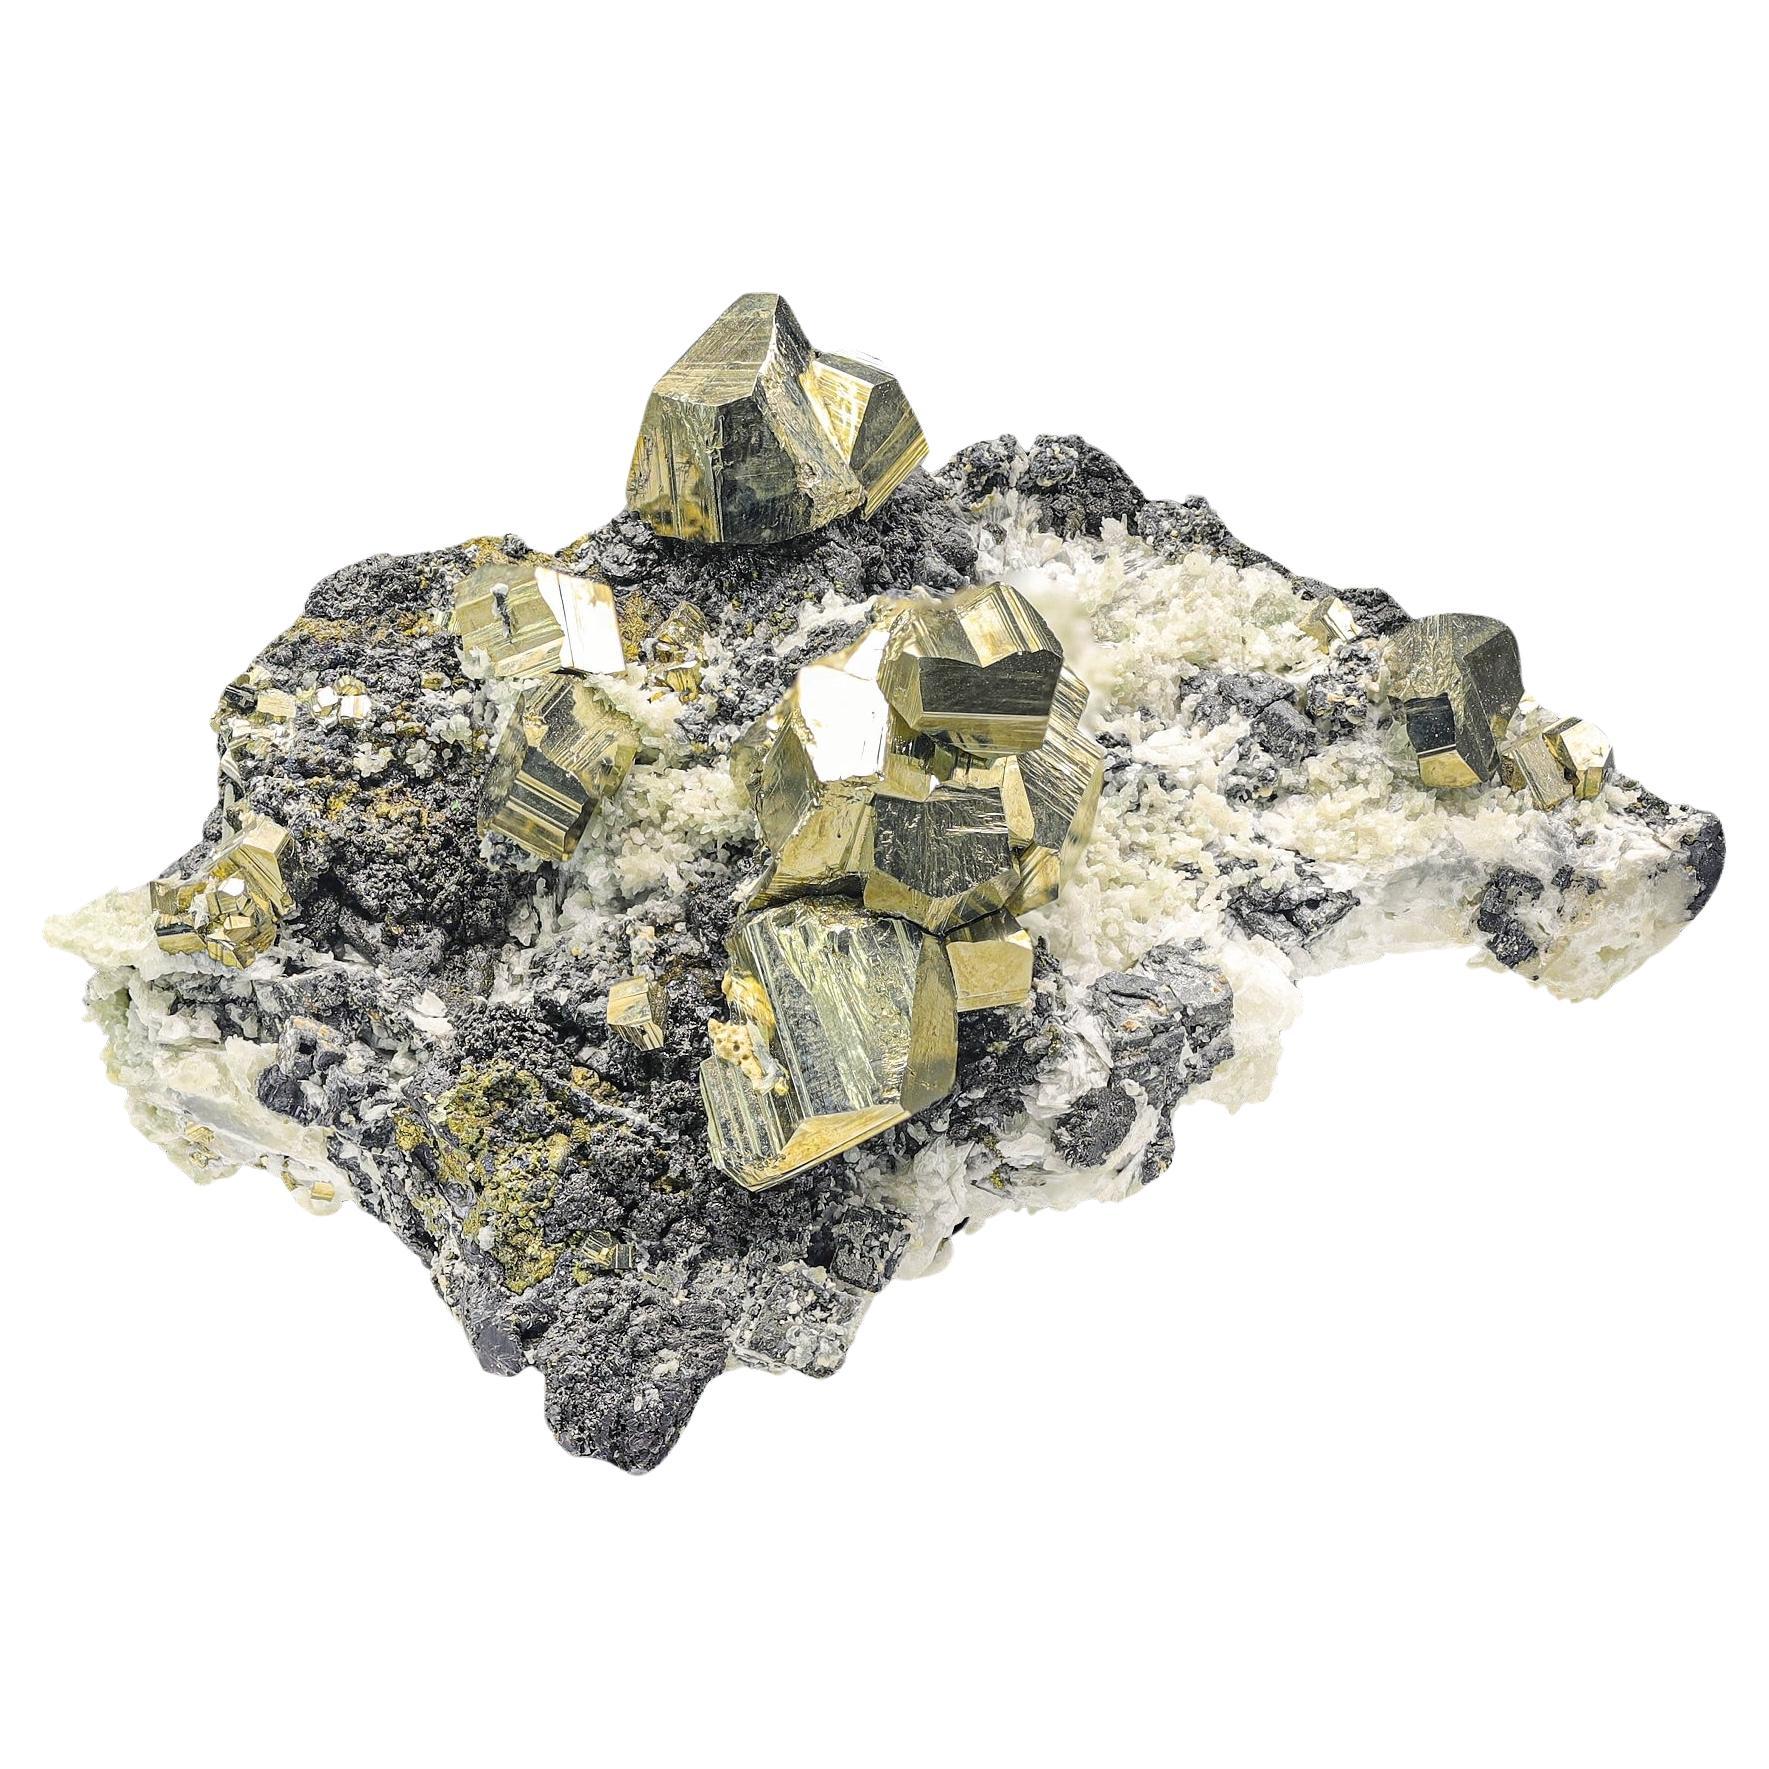 Glamming Golden Color Intergrown Pyrite Crystals On Matrix From Pakistan